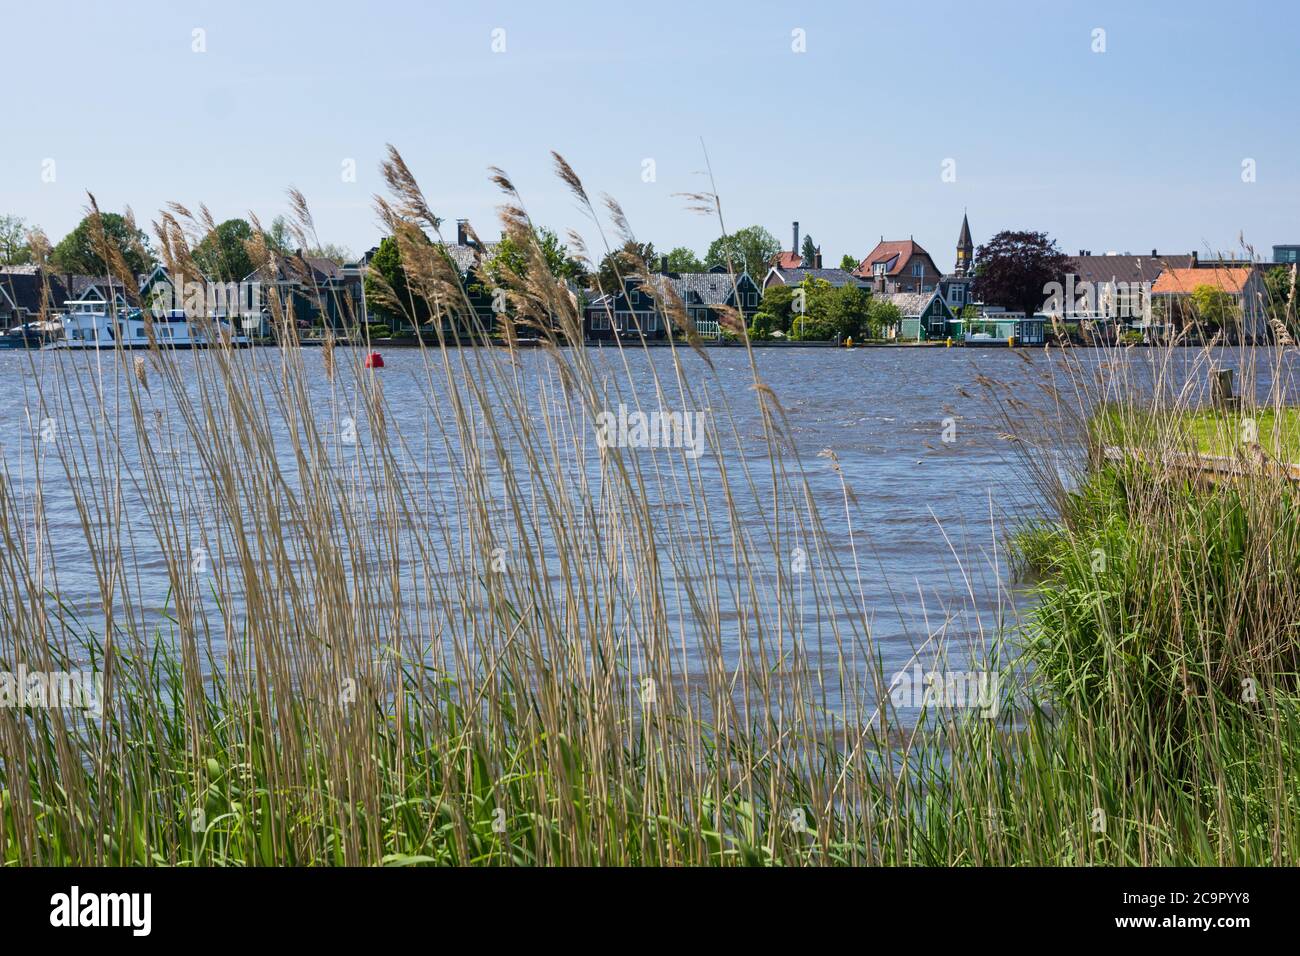 Grass in foreground of Dutch houses on the Zaans river at Zaanse Schans in North Holland, the Netherlands. Stock Photo